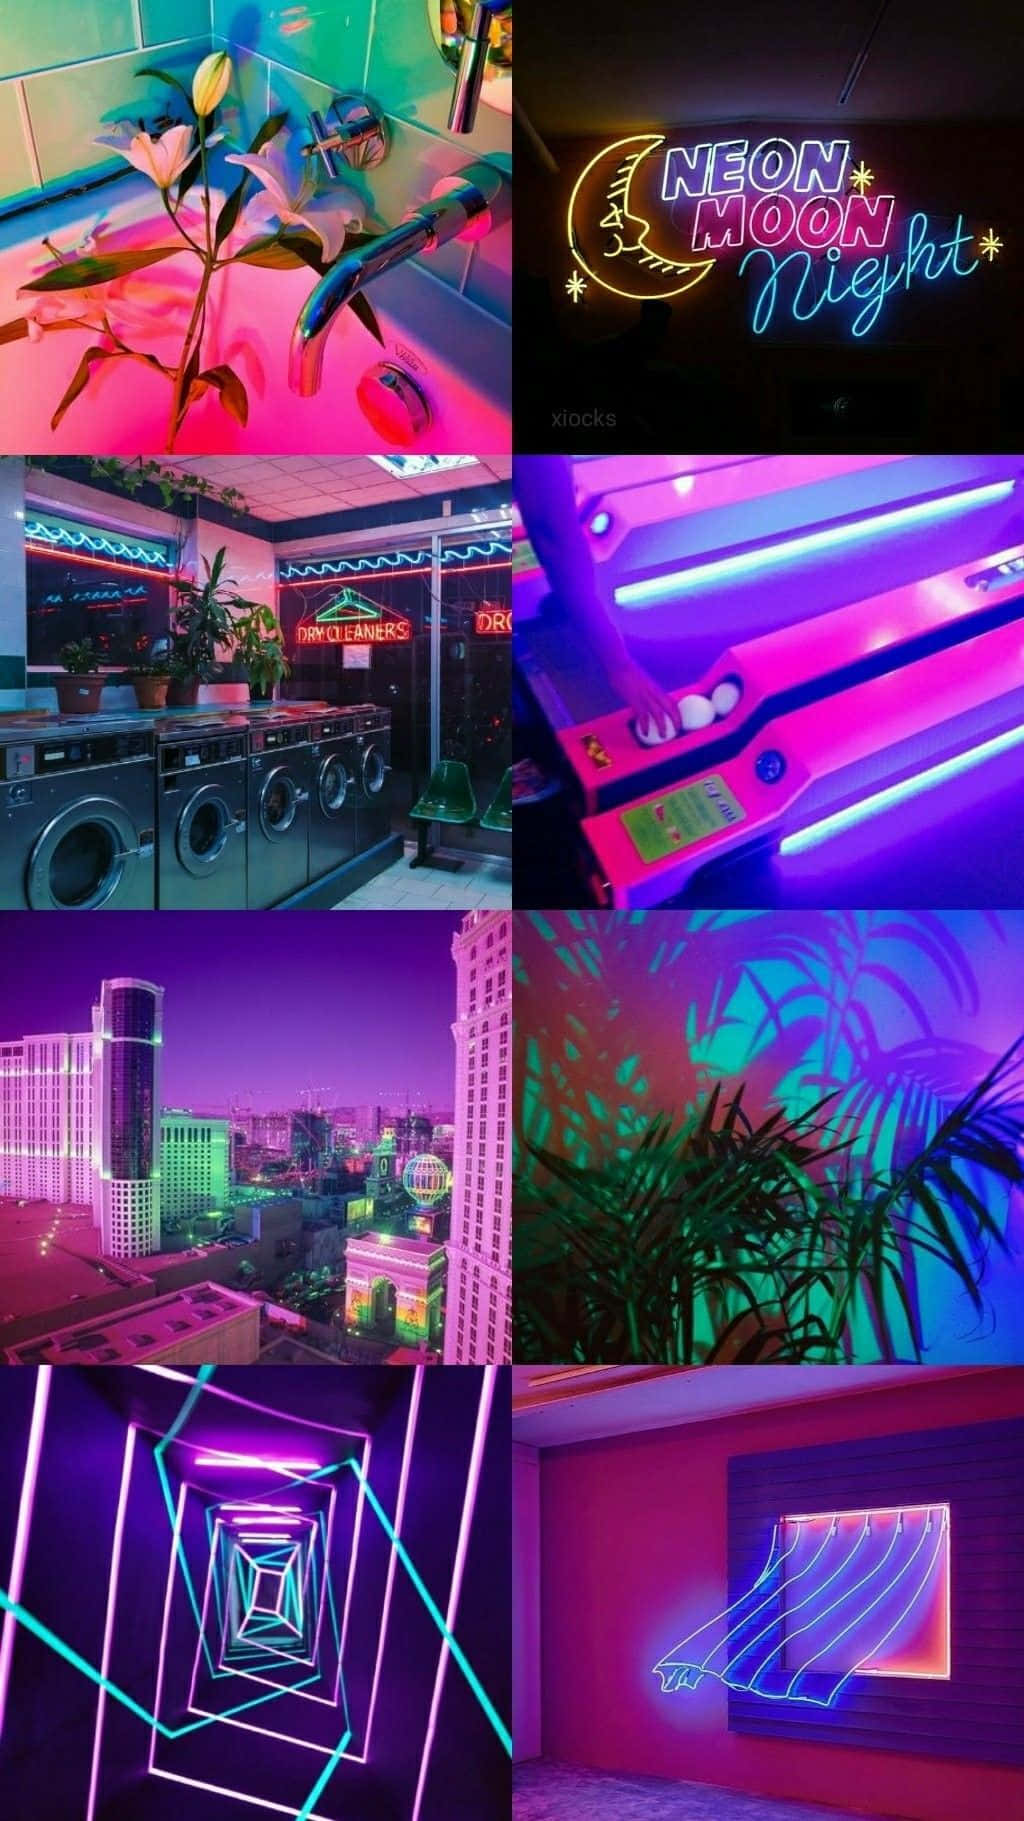 "Create a beautiful, futuristic landscape with the perfect Neon Aesthetic background"